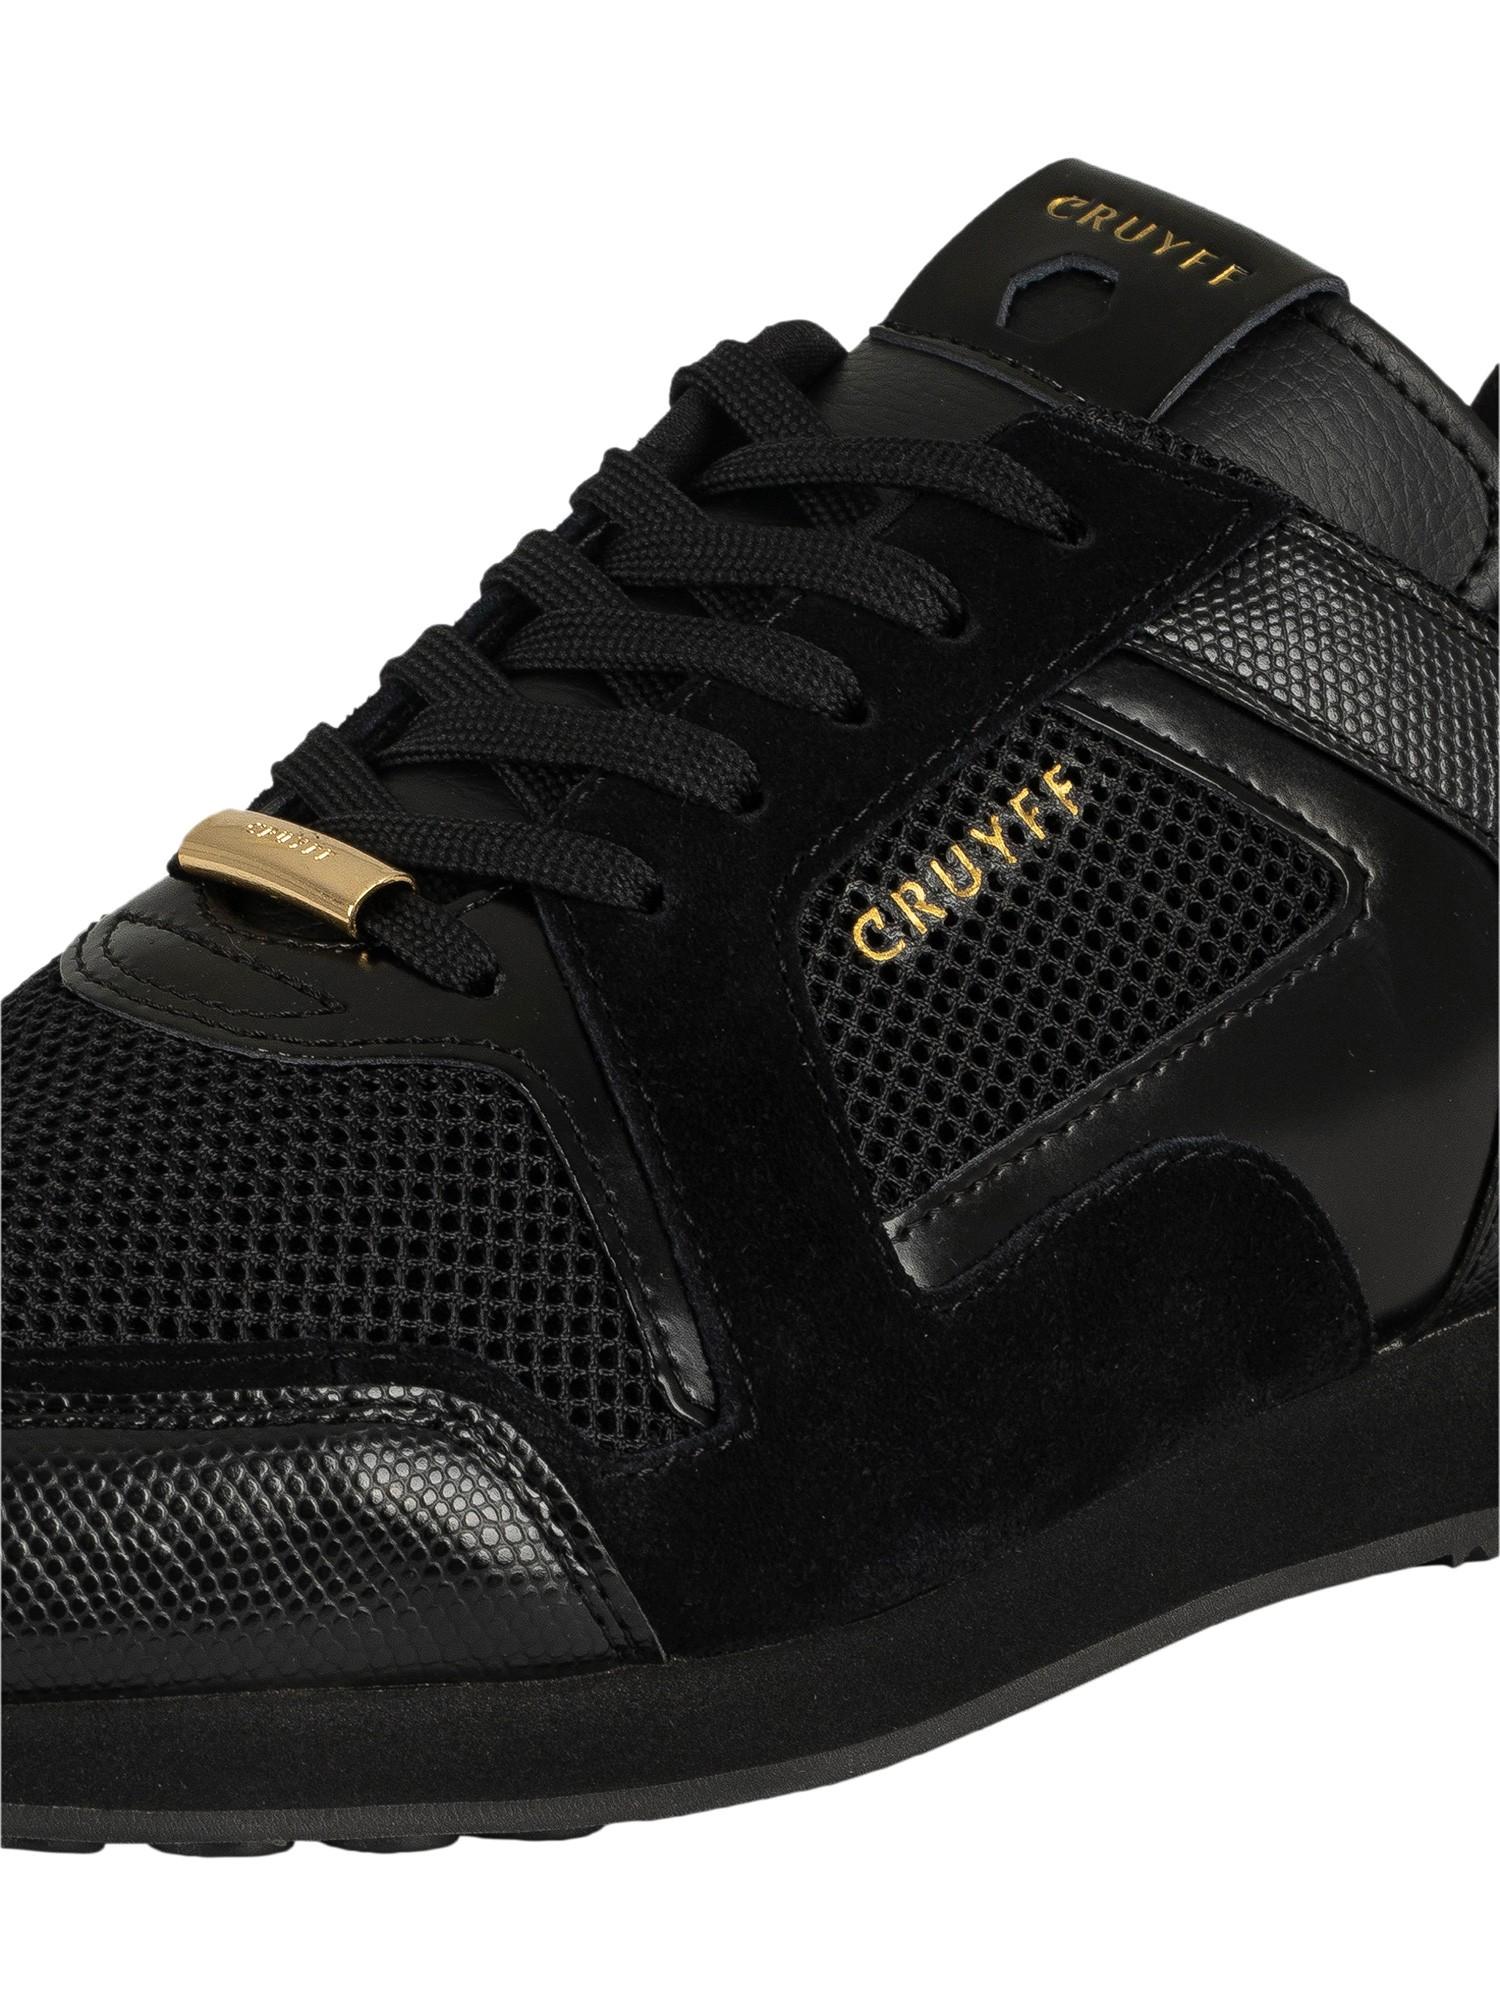 Cruyff Lusso Suede Trainers in Black for Men - Lyst